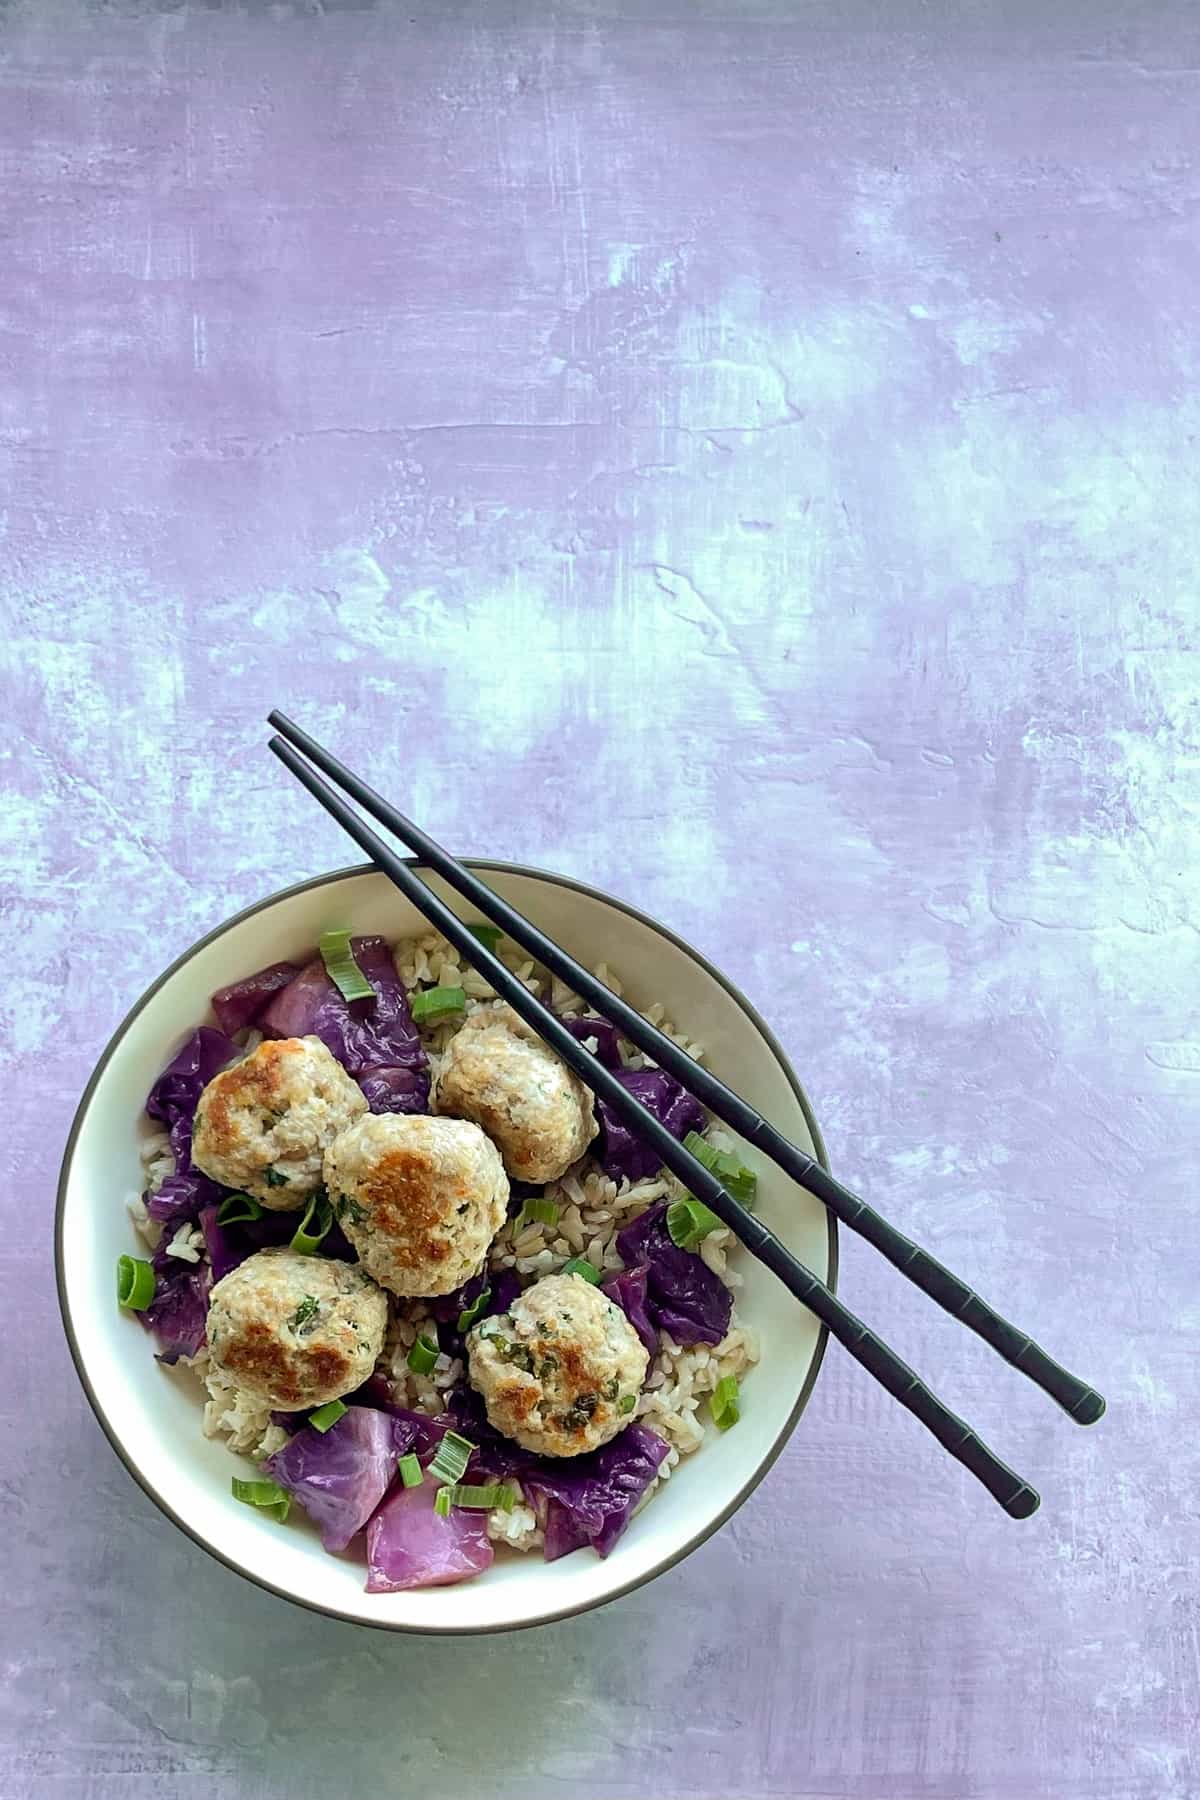 shrimp and pork meatballs in a bowl with rice, pickled cabbage, green onions, and chopsticks.